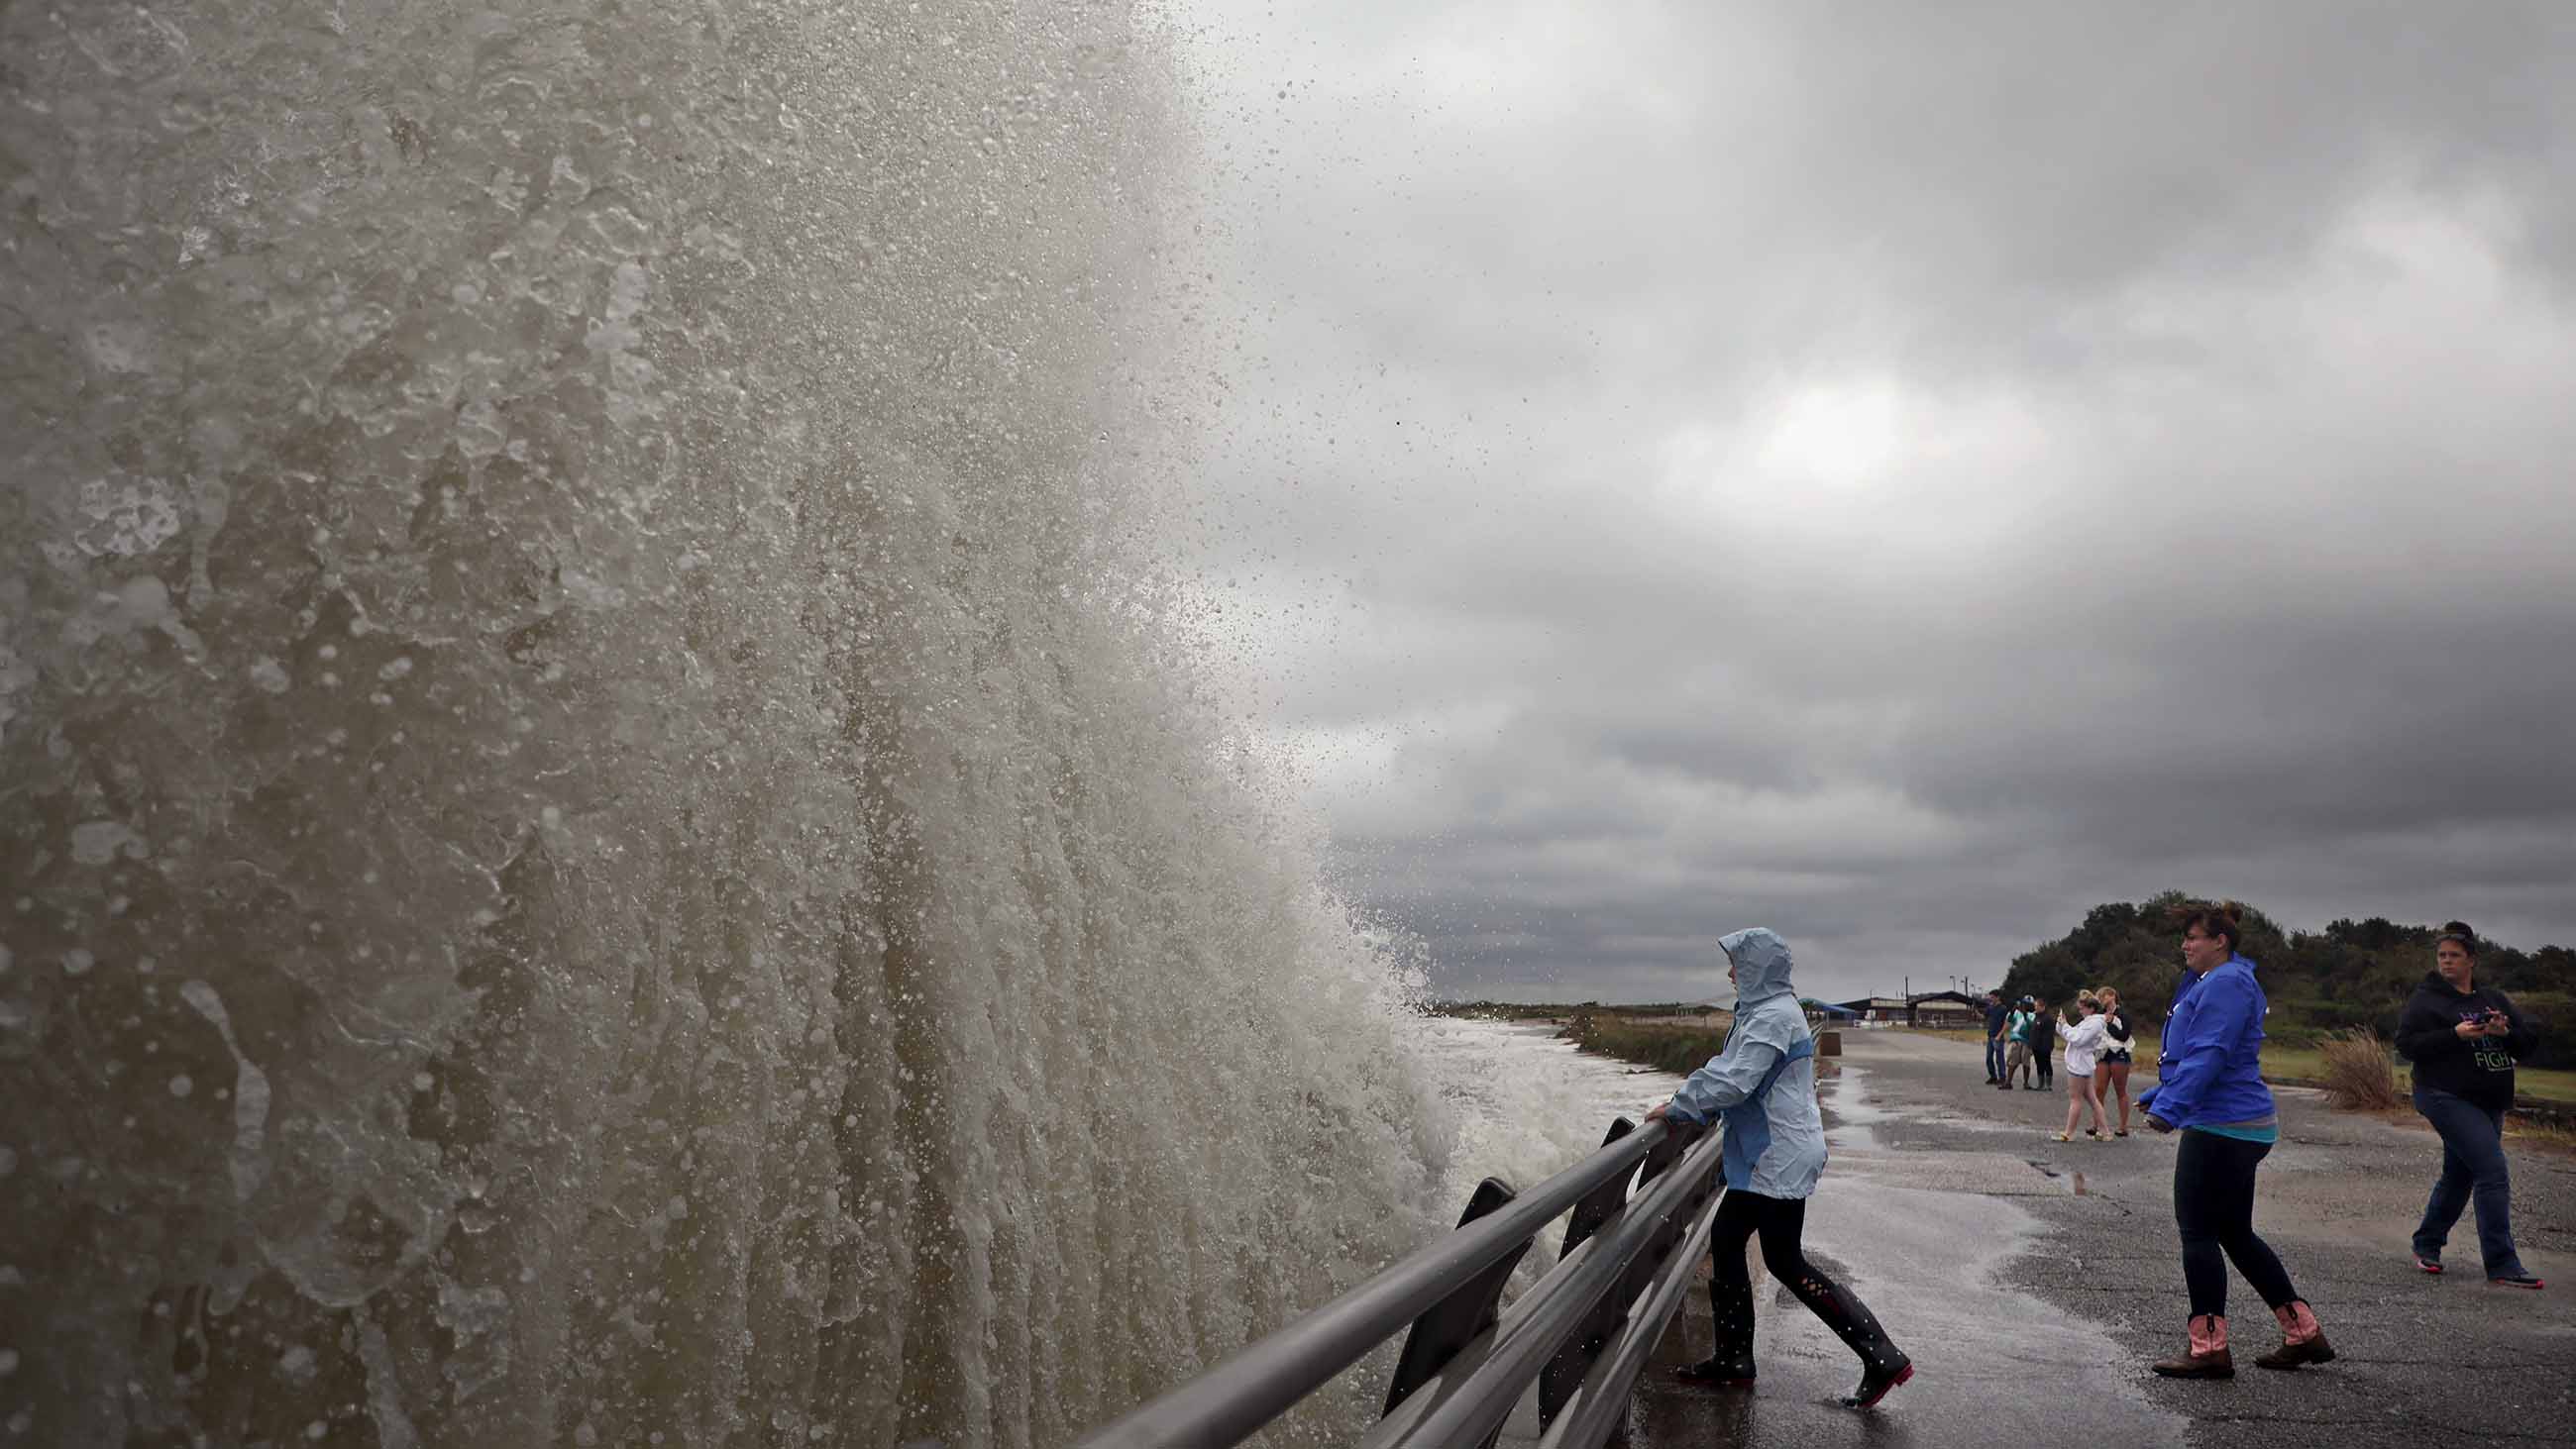 On the left, storm surge wave towers before viewers on a boardwalk by the ocean in Virginia.